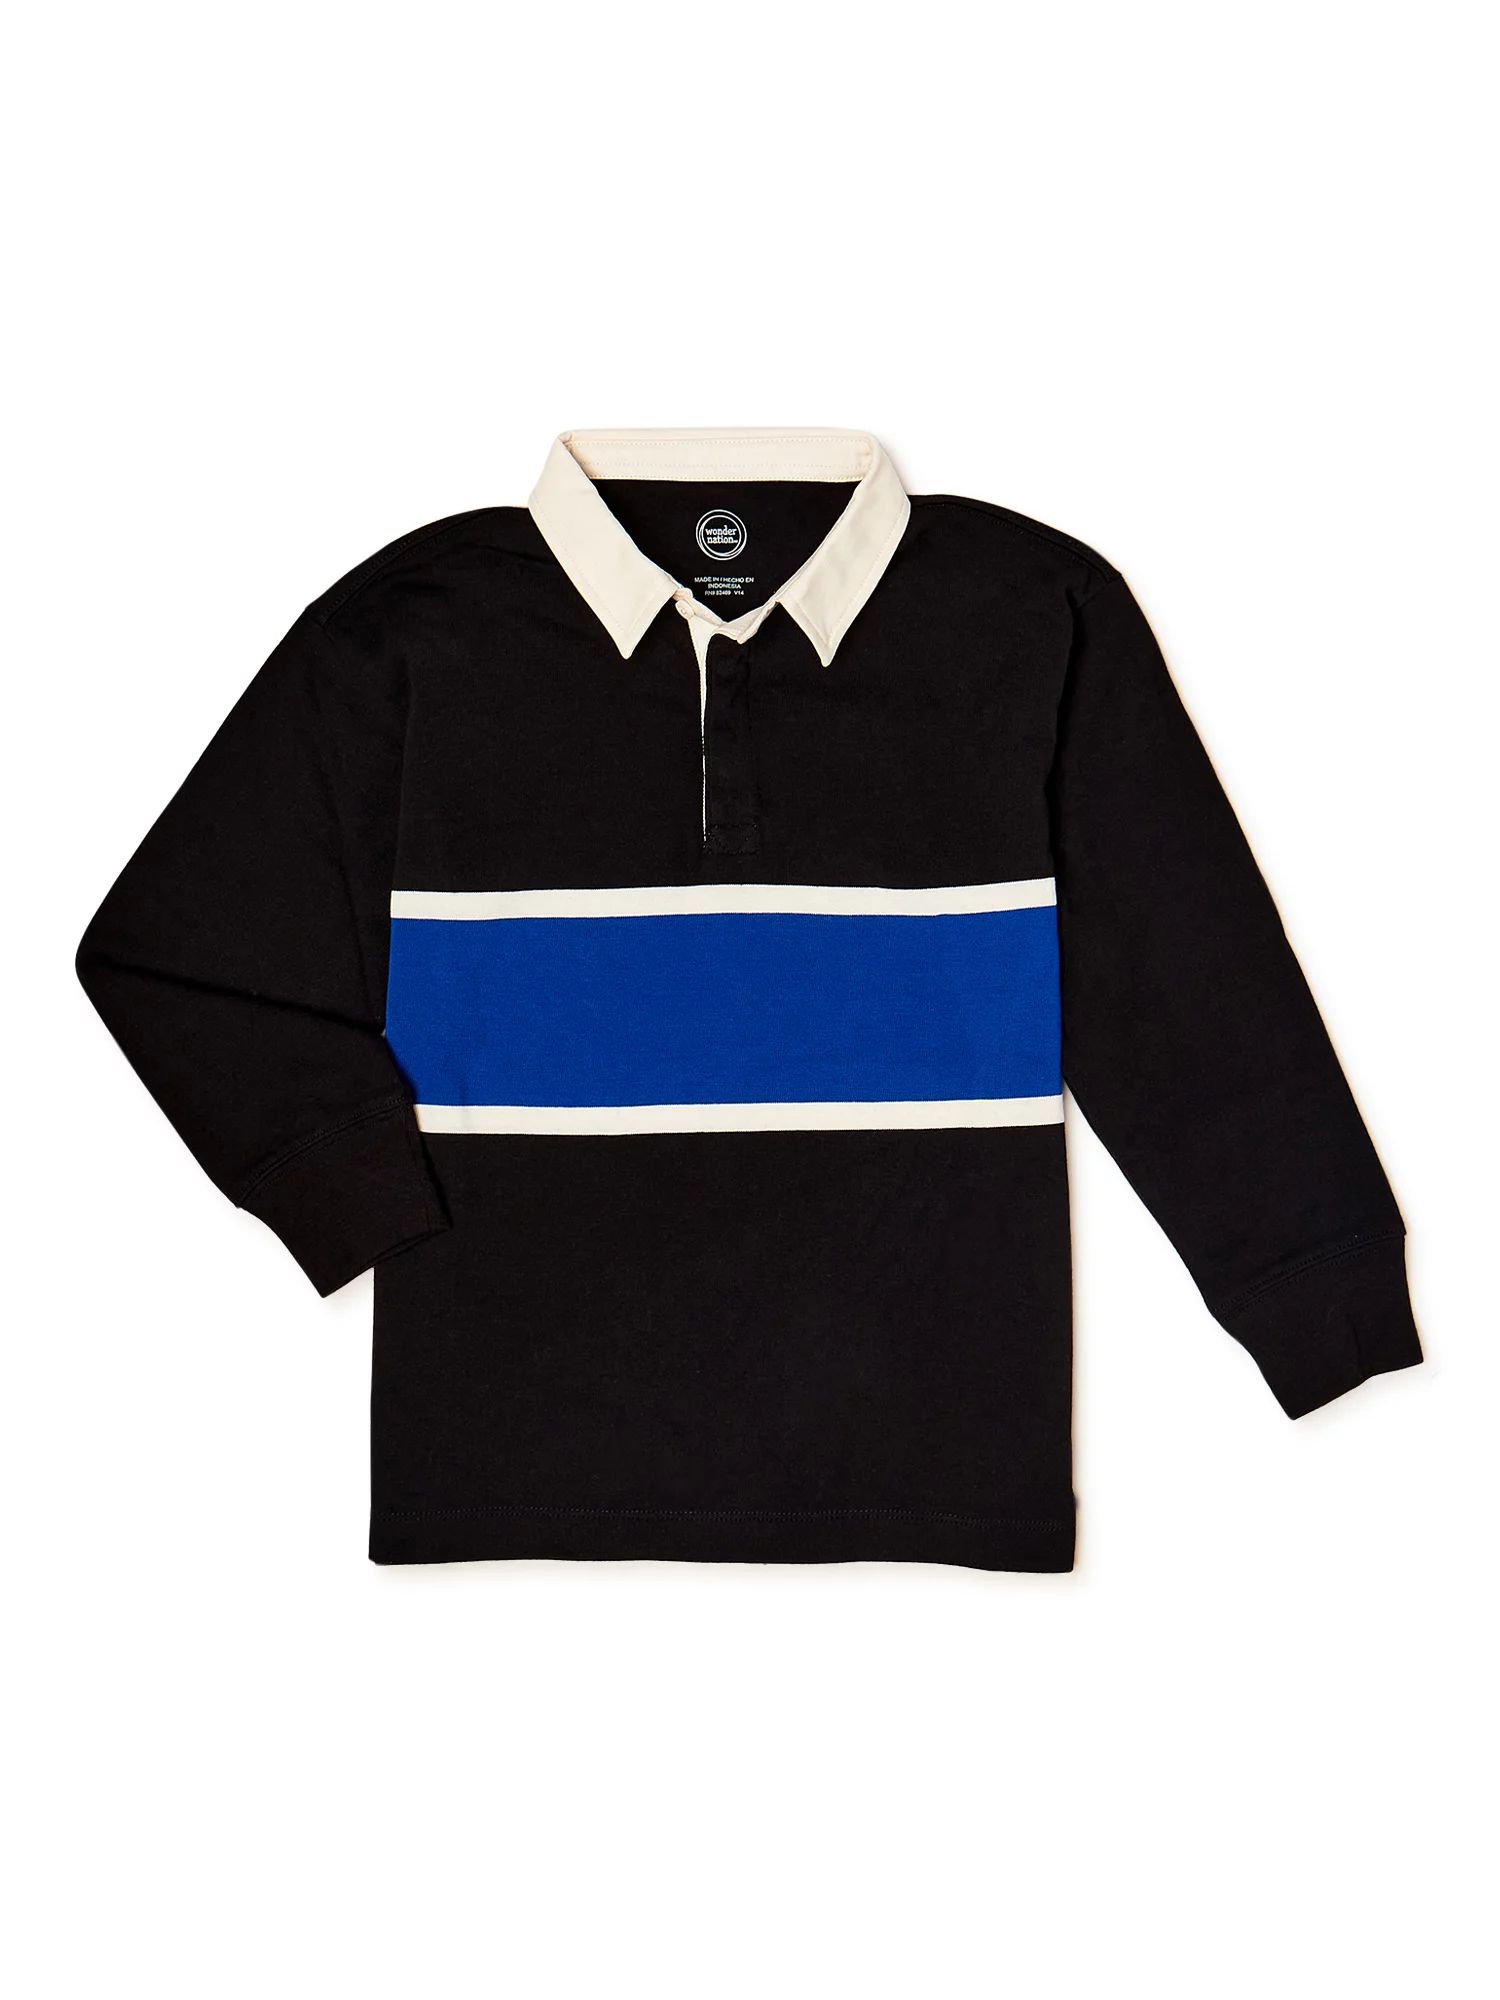 Wonder Nation Boys Rugby Polo Top, Sizes 4-18 | Walmart (US)